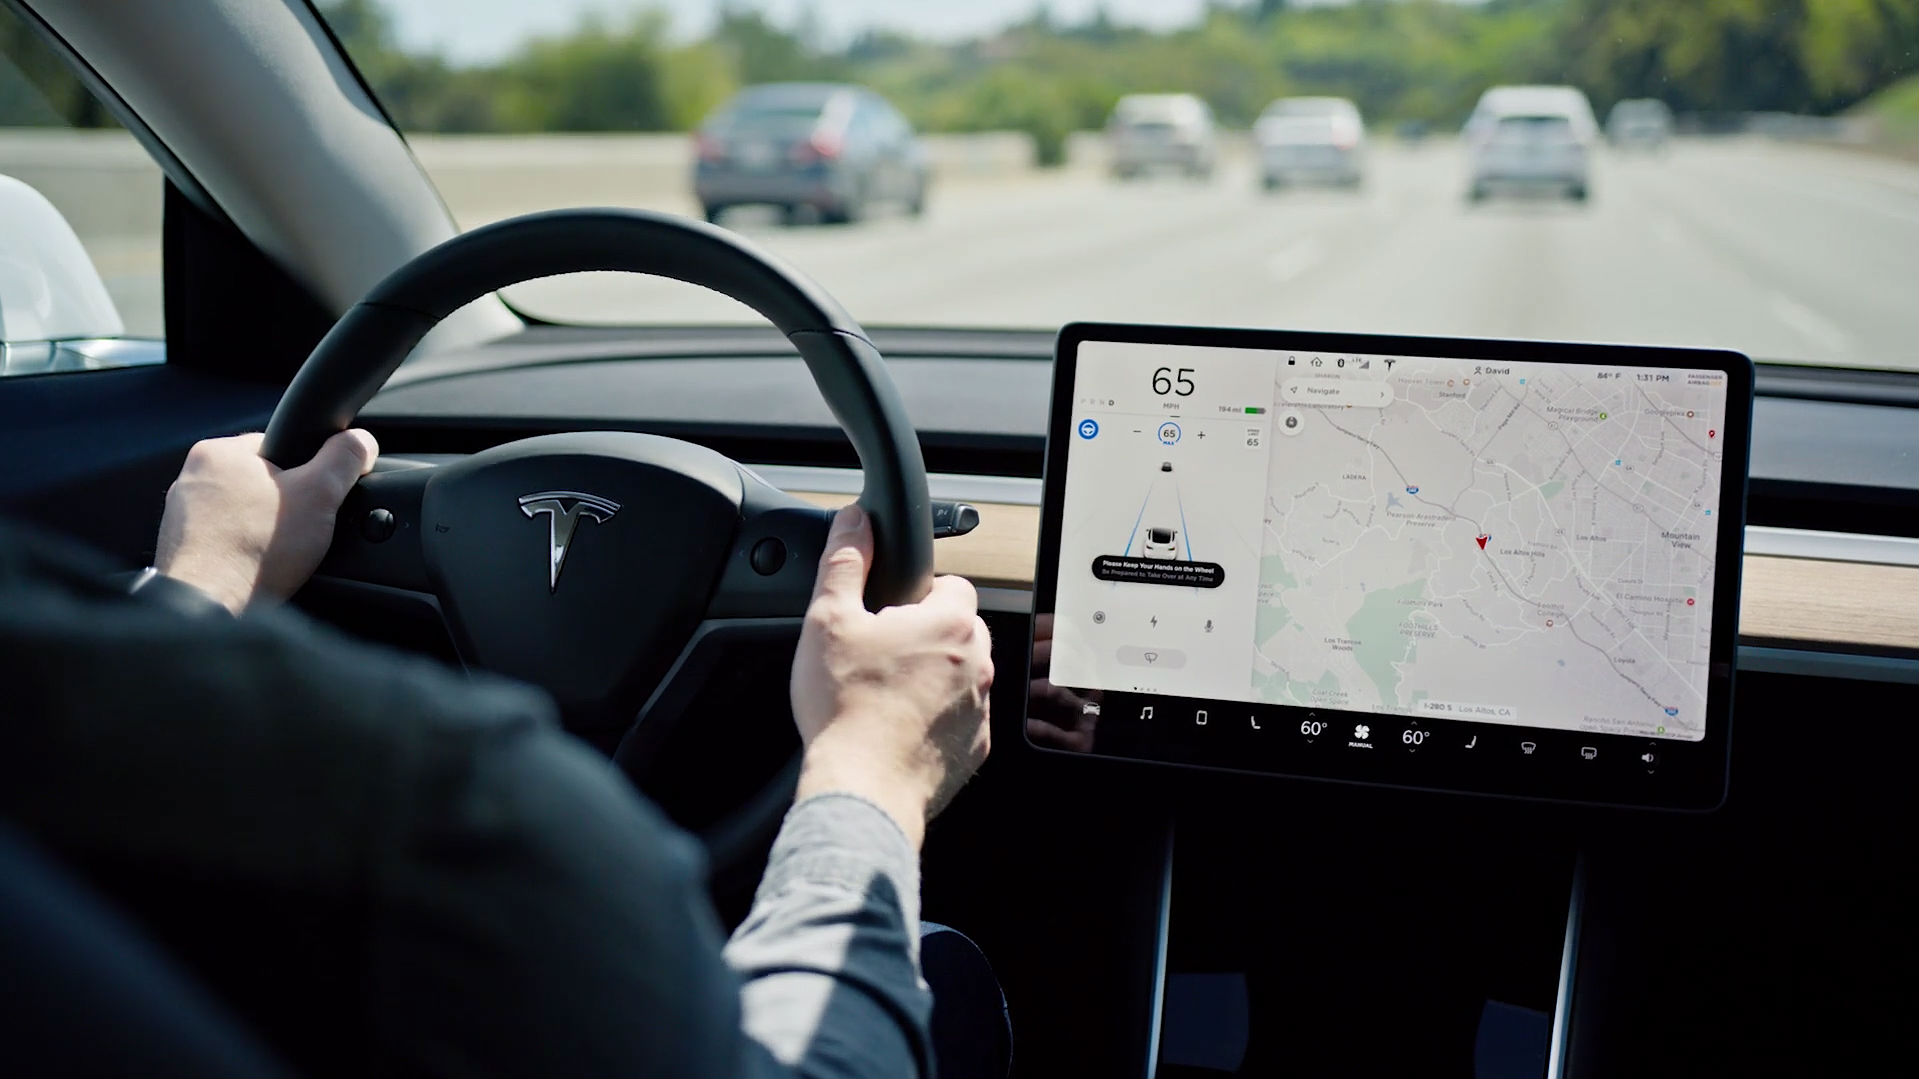 Tesla patent reveals ‘High Speed Wiring’ design for full self-driving safety